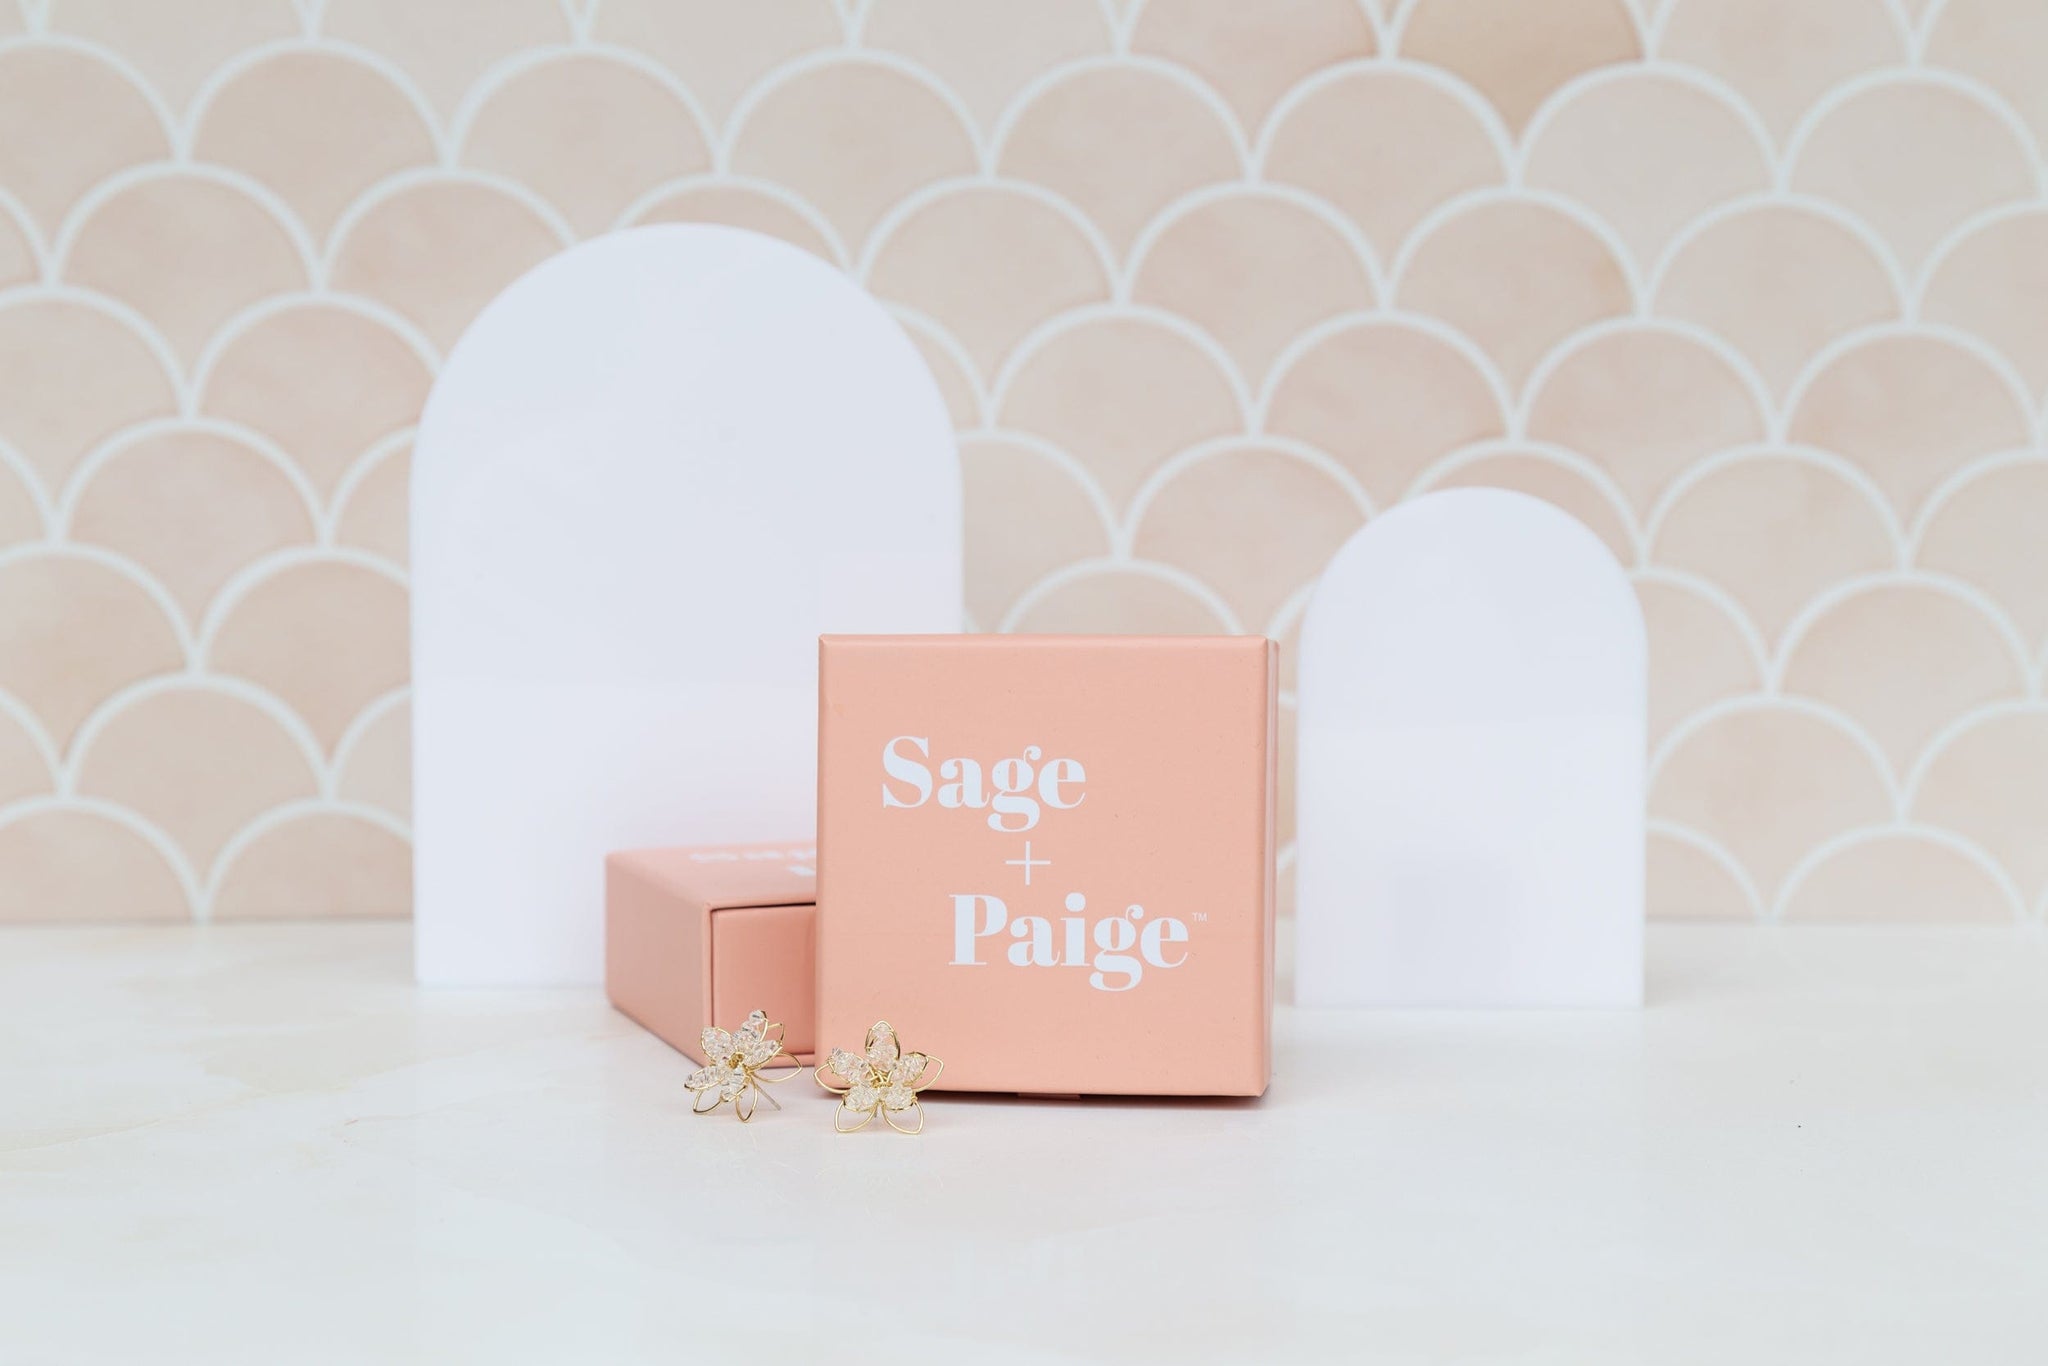 small and large acrylic arch shapes photographed against a peach fish scale tile with earrings - backdrop collective